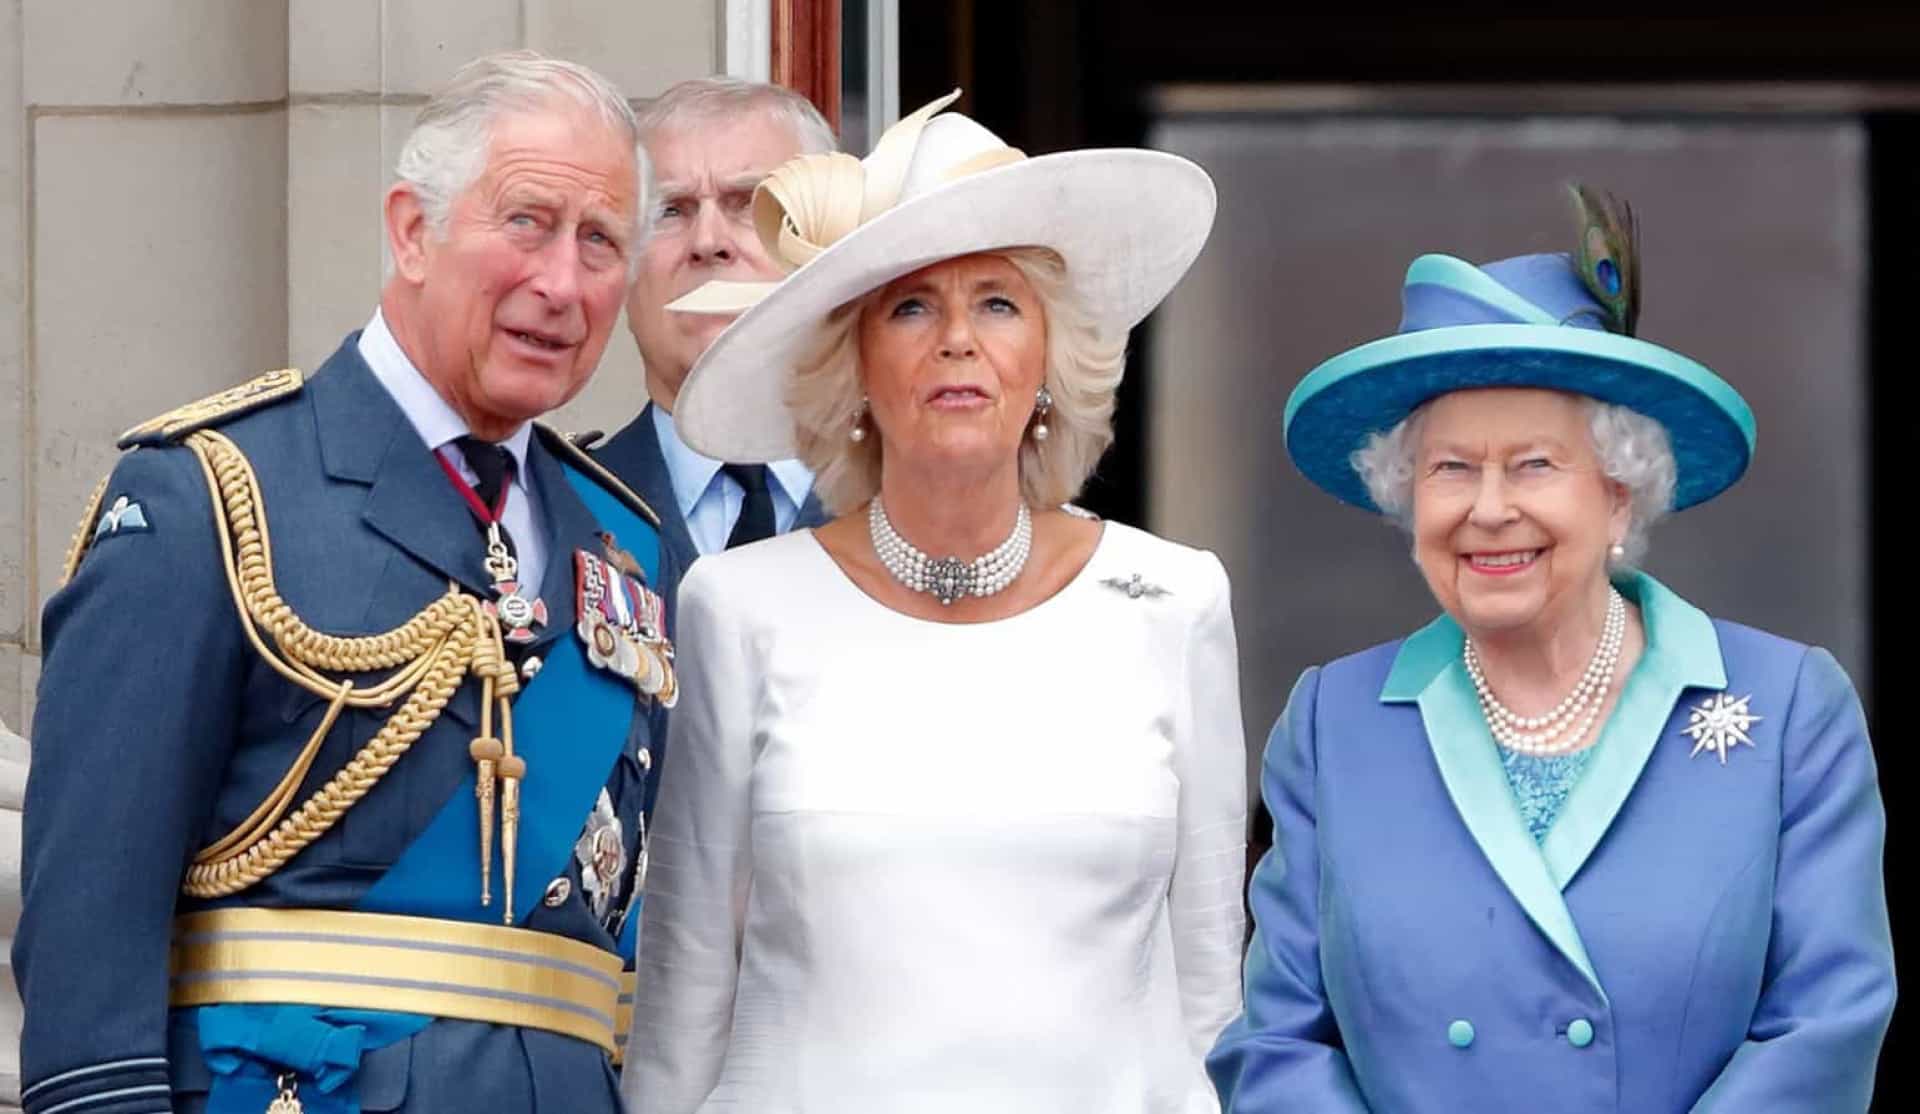 Star-crossed lovers: the story of King Charles and Queen Camilla